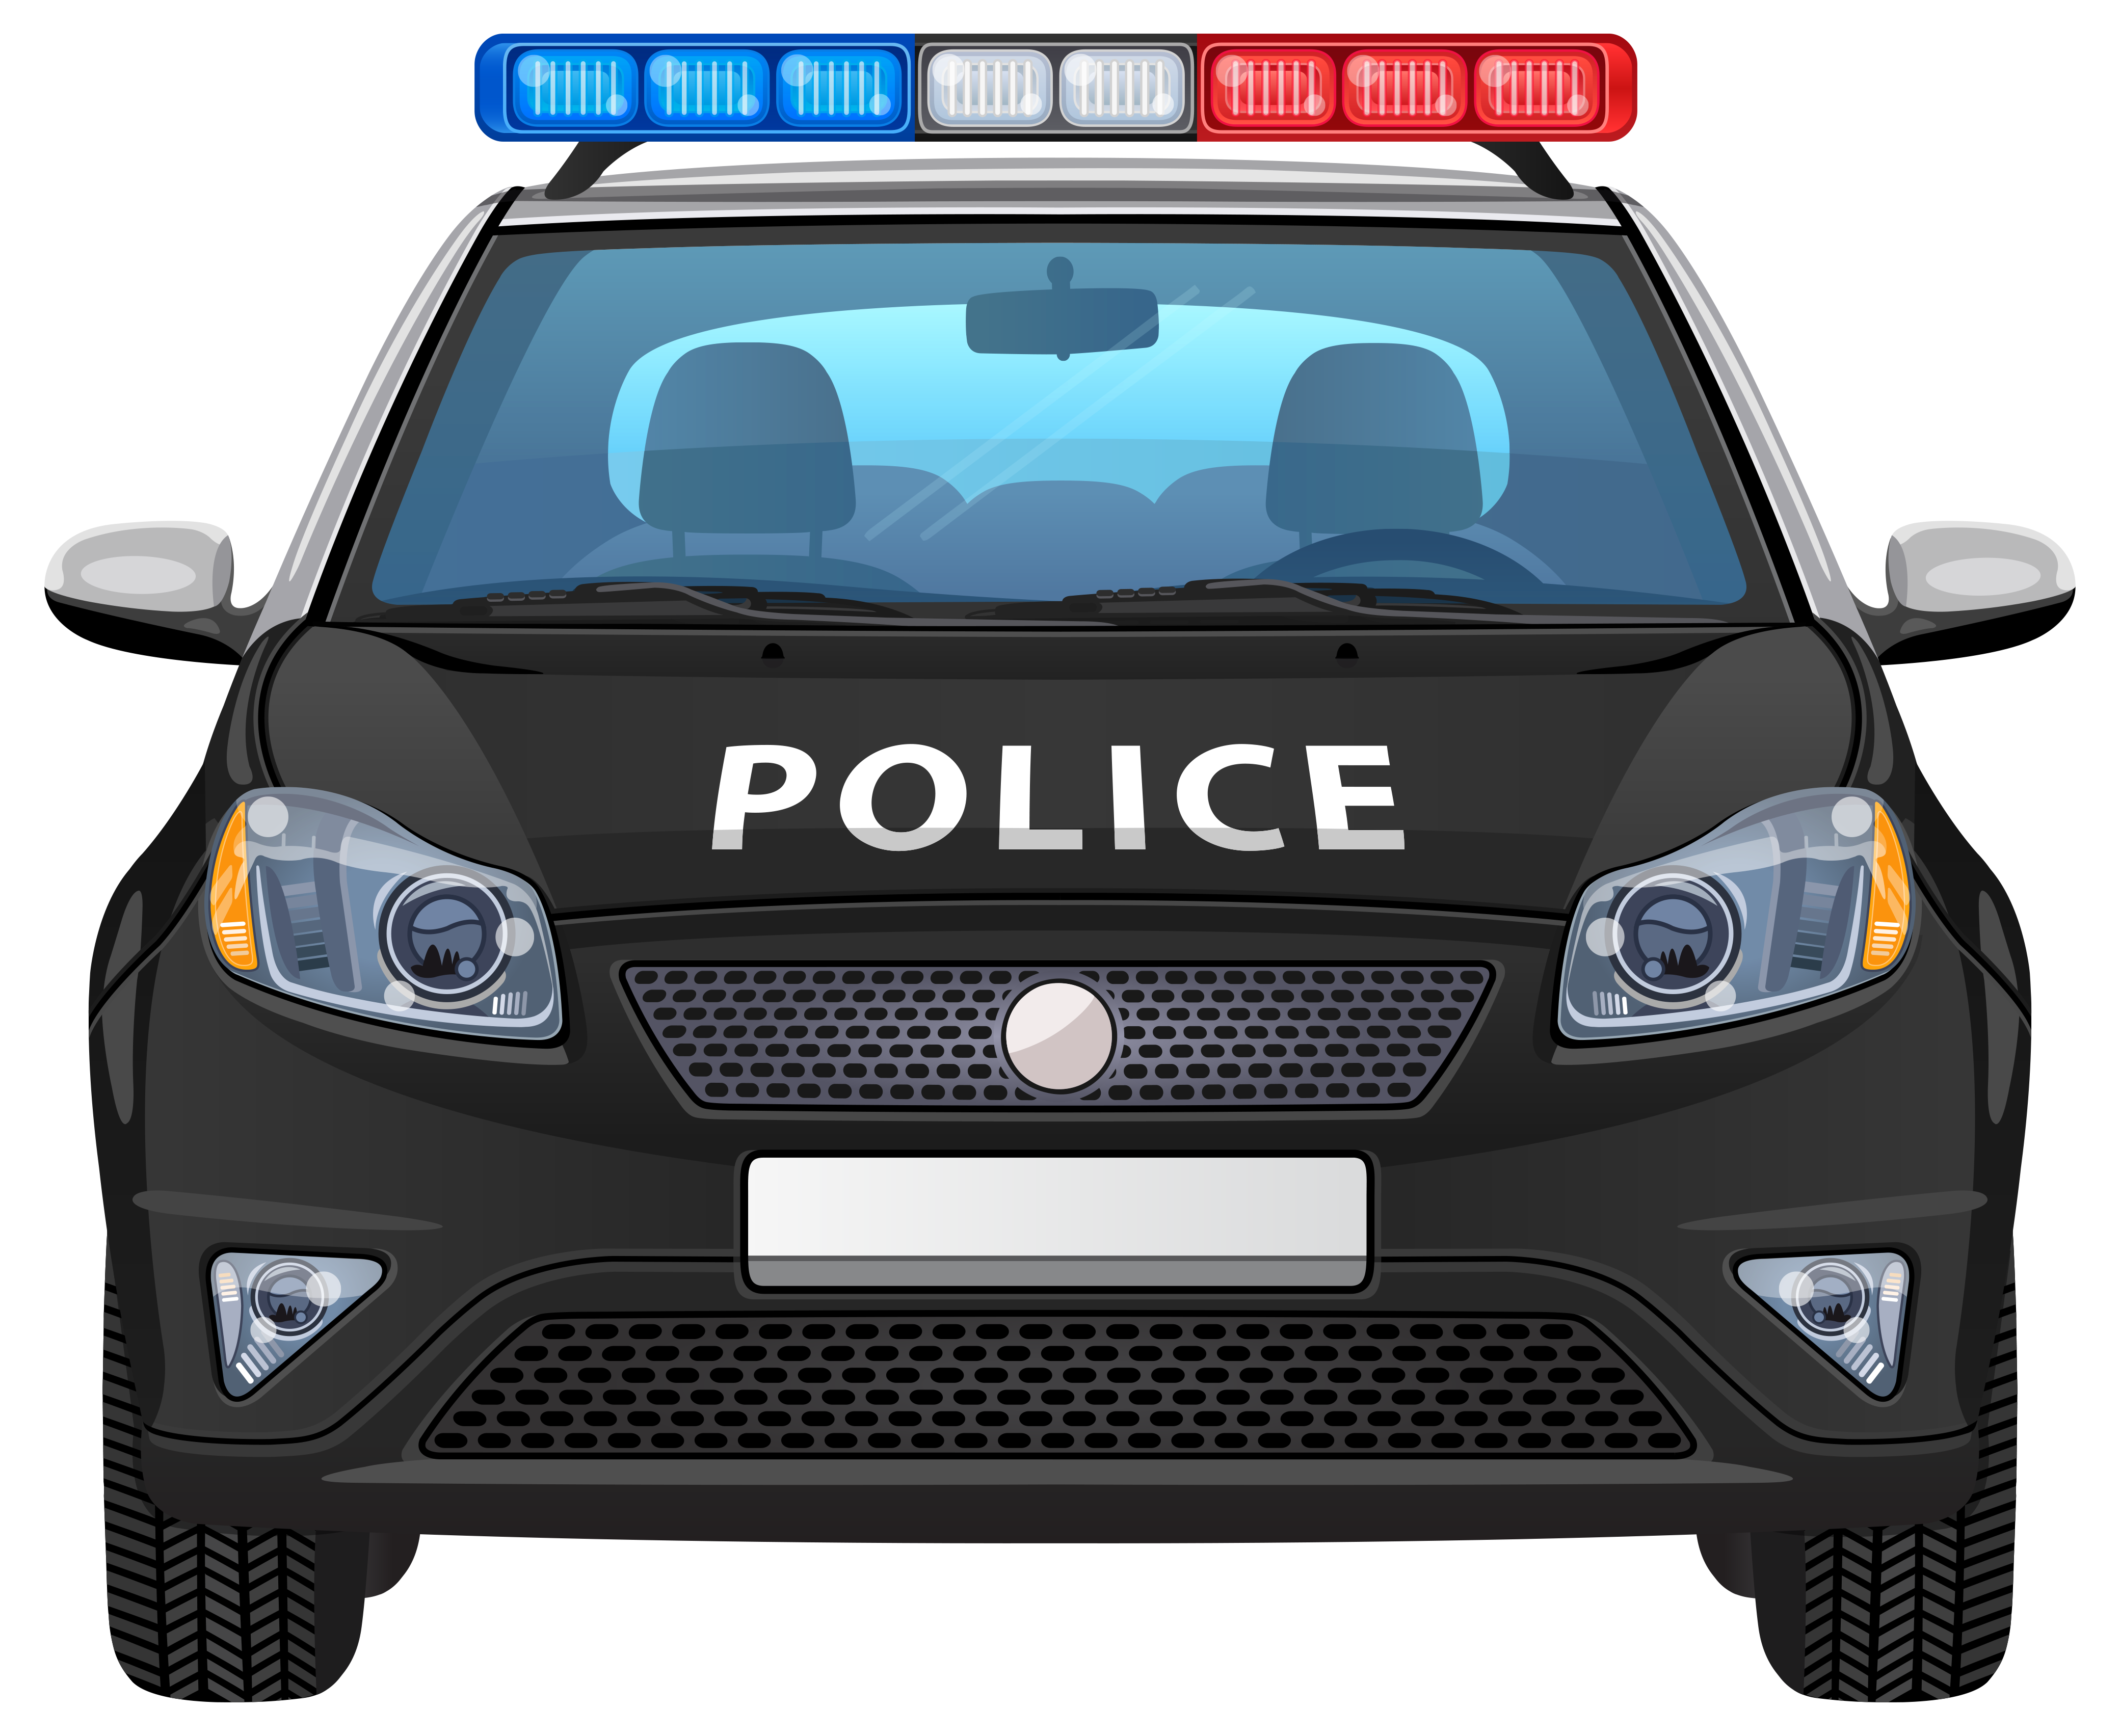 police car clipart images - photo #24